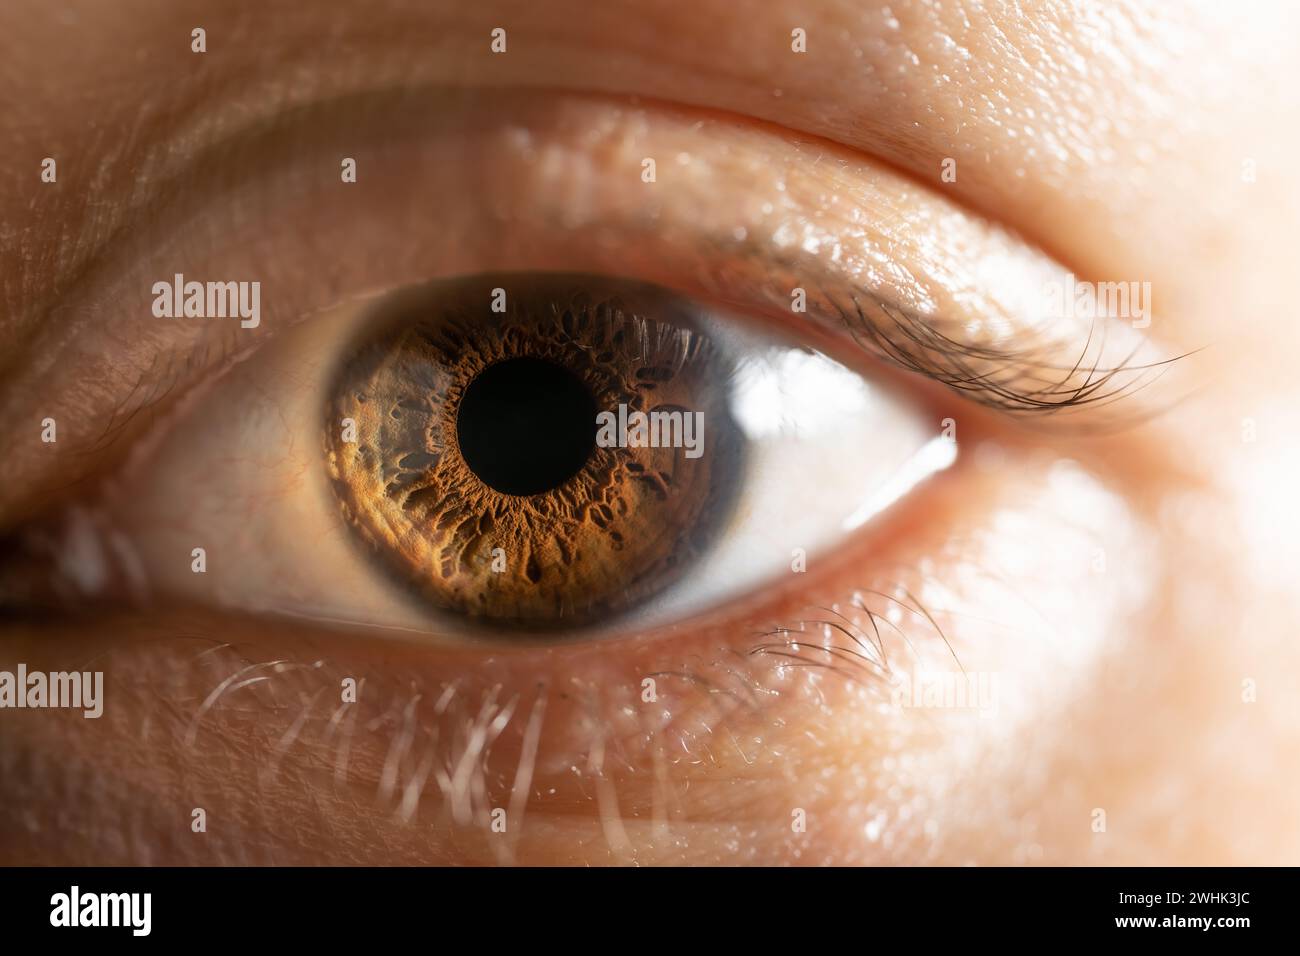 Description: Female Brown Colored Eye With Long Lashes Close Up. Structural Anatomy. Human Iris Macro Detail. Stock Photo